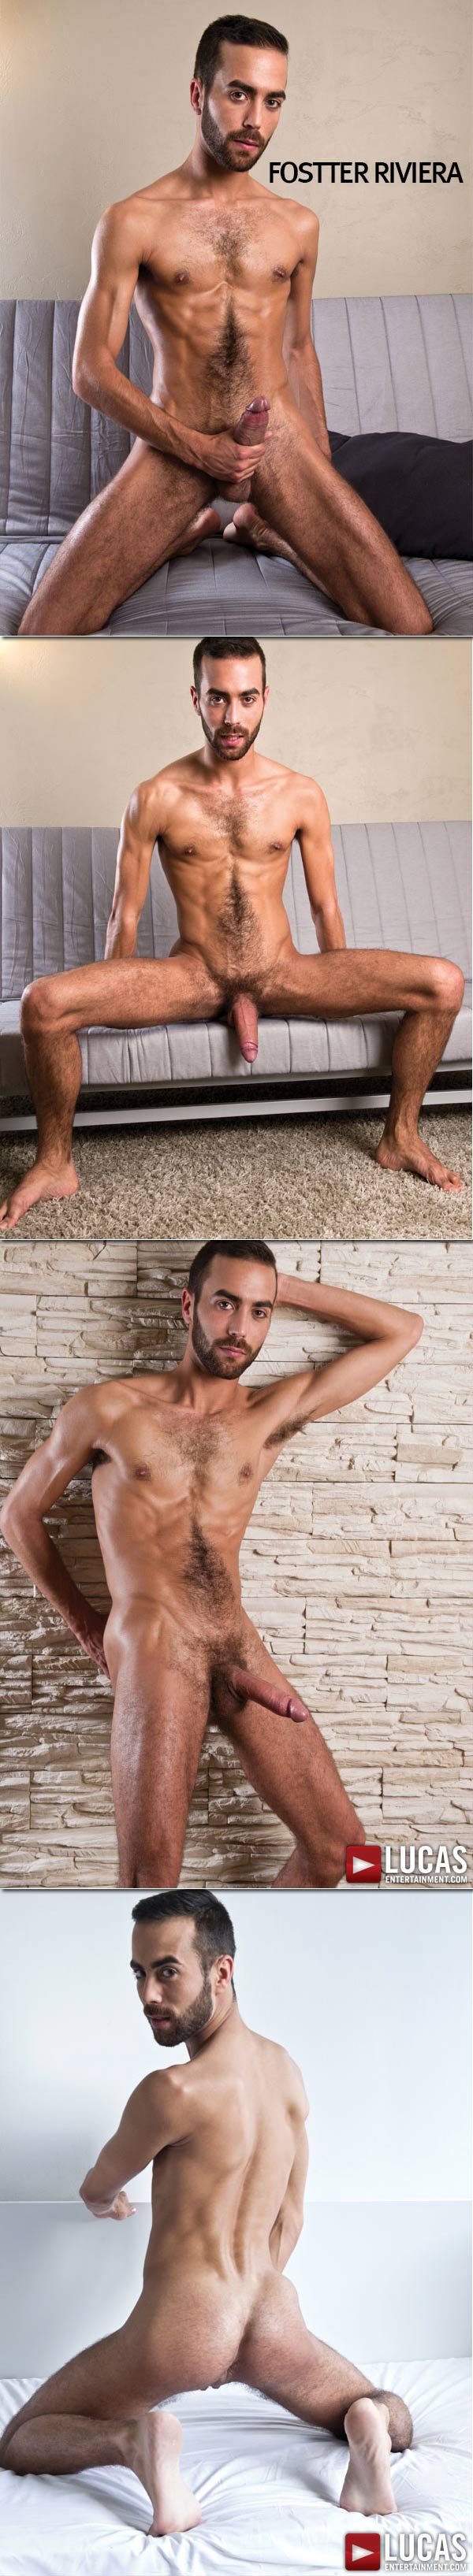 Alex Lopez, Theo Ford, Raul Korso and Fostter Riviera (Bareback) at LucasEntertainment.com